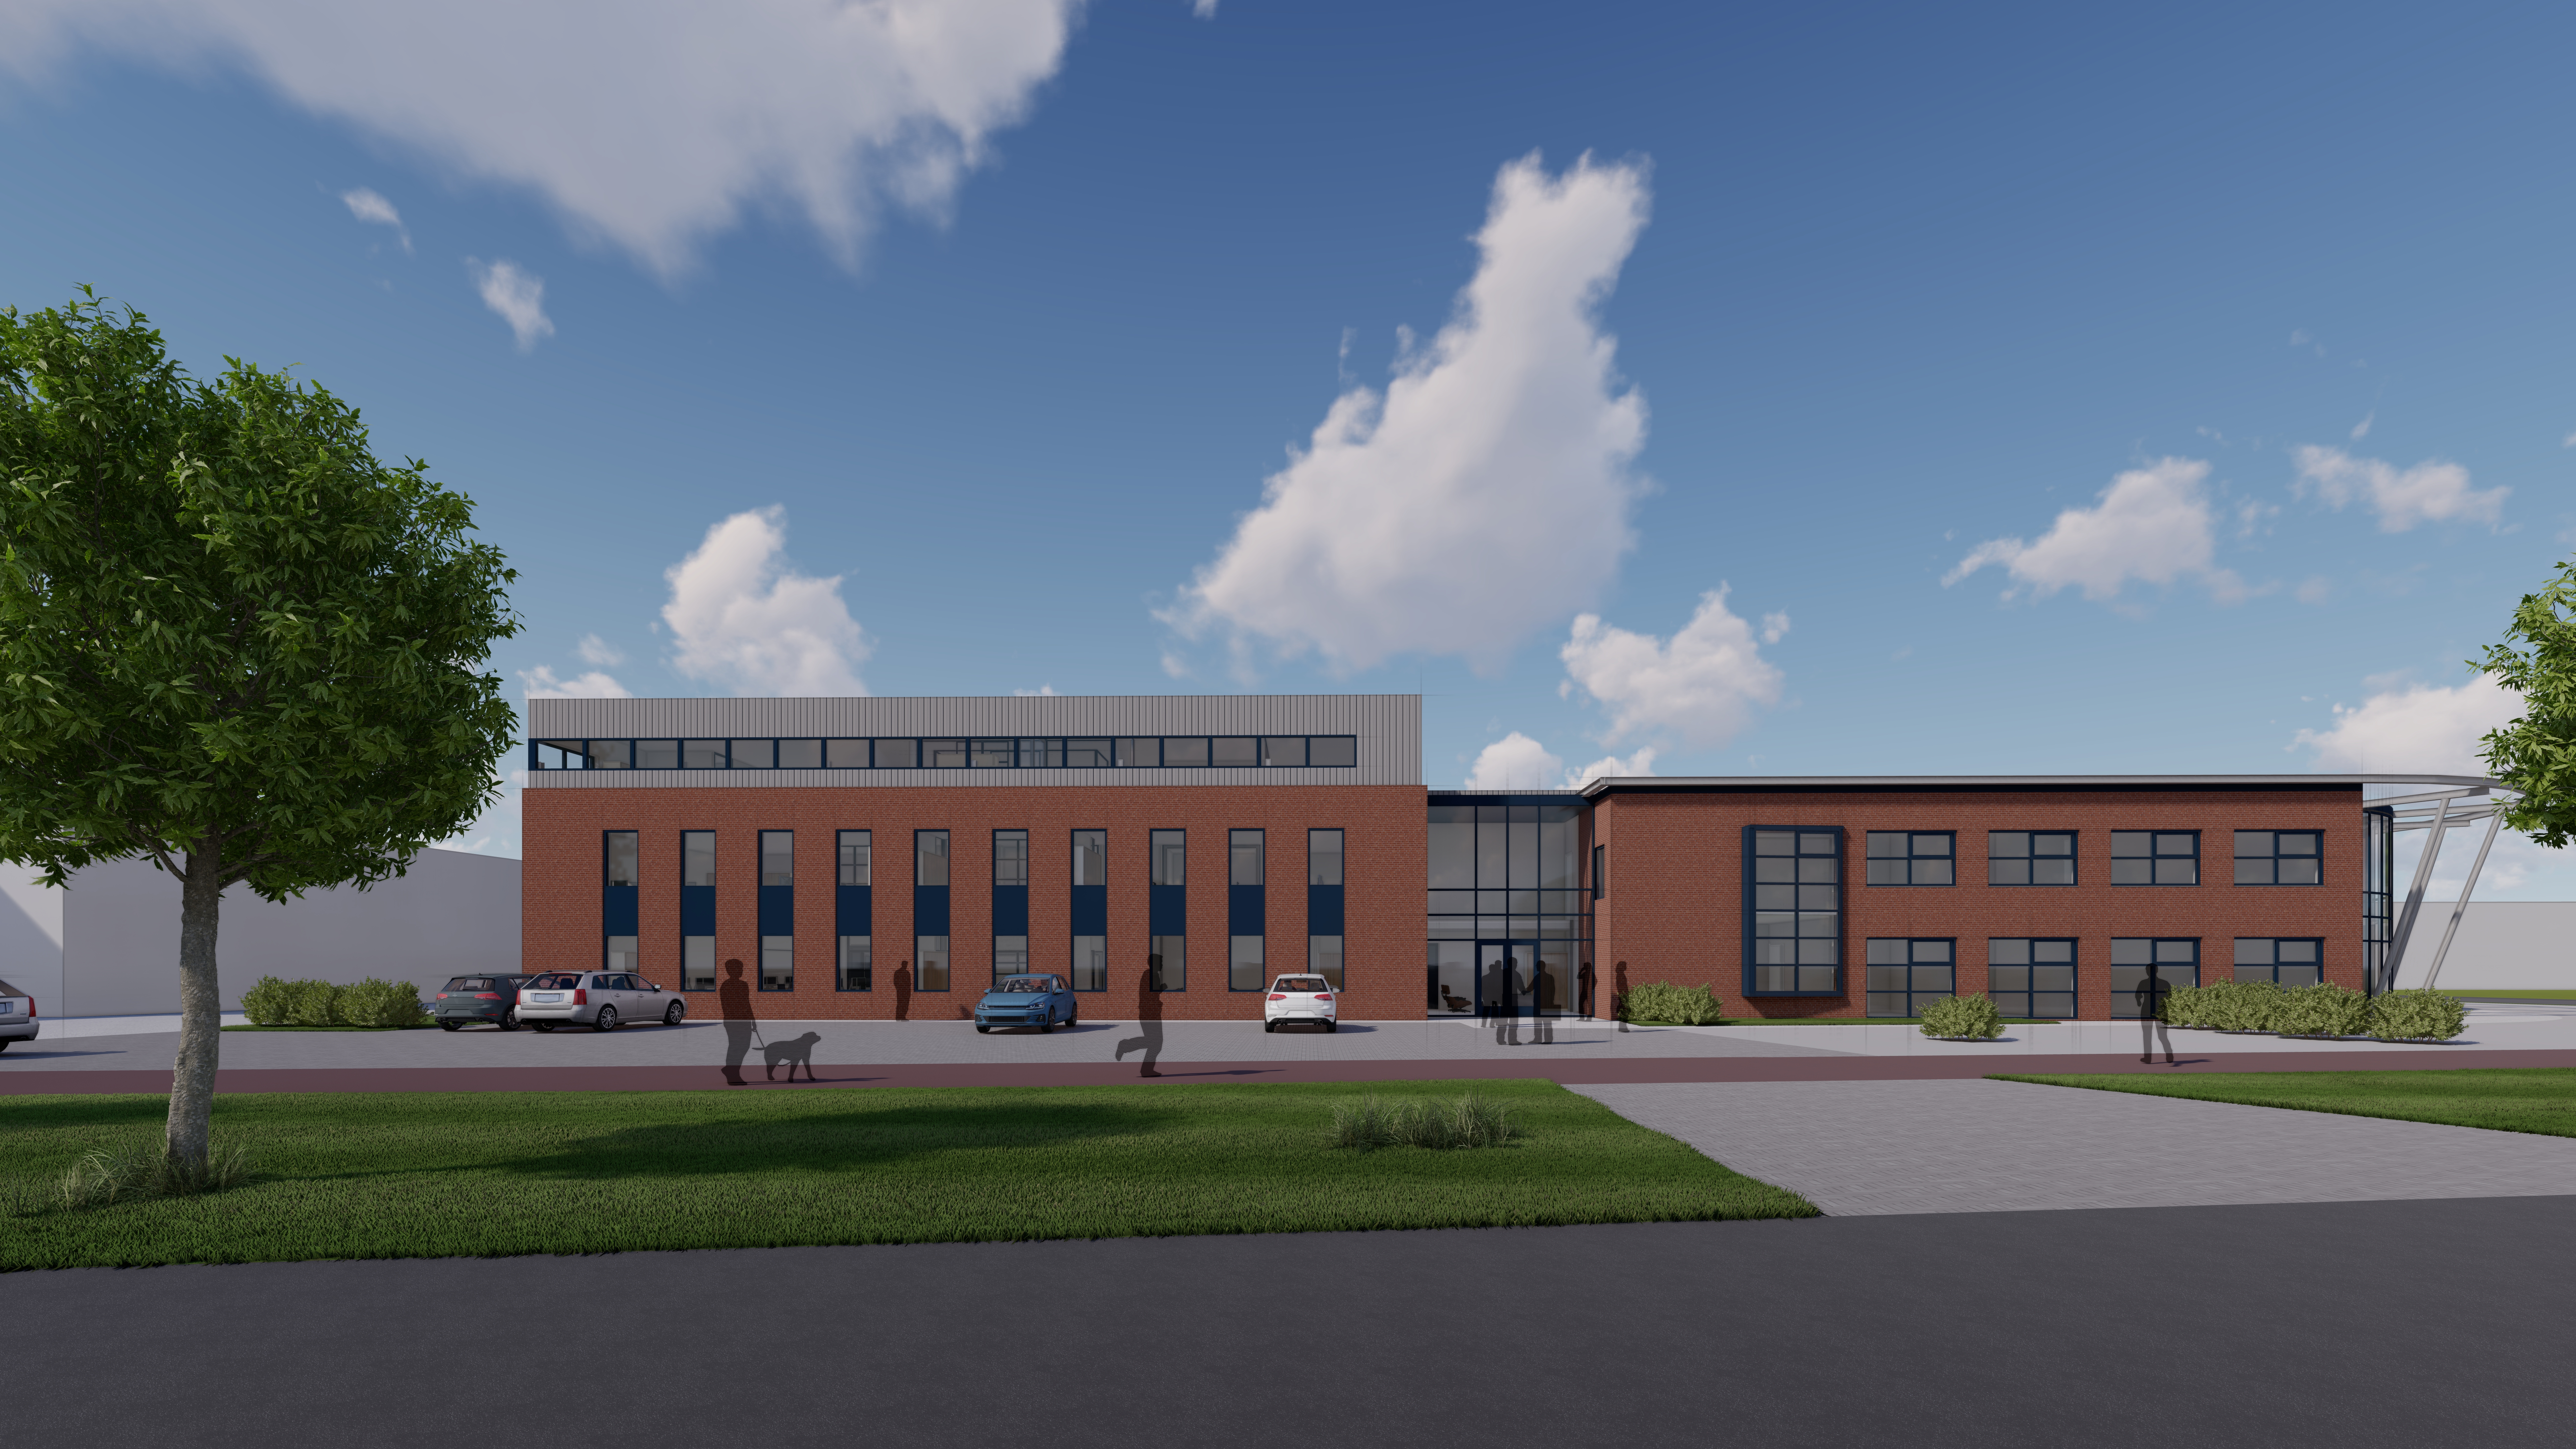 Lumipol invests in building for the companies DET and Xeamos in Wijchen